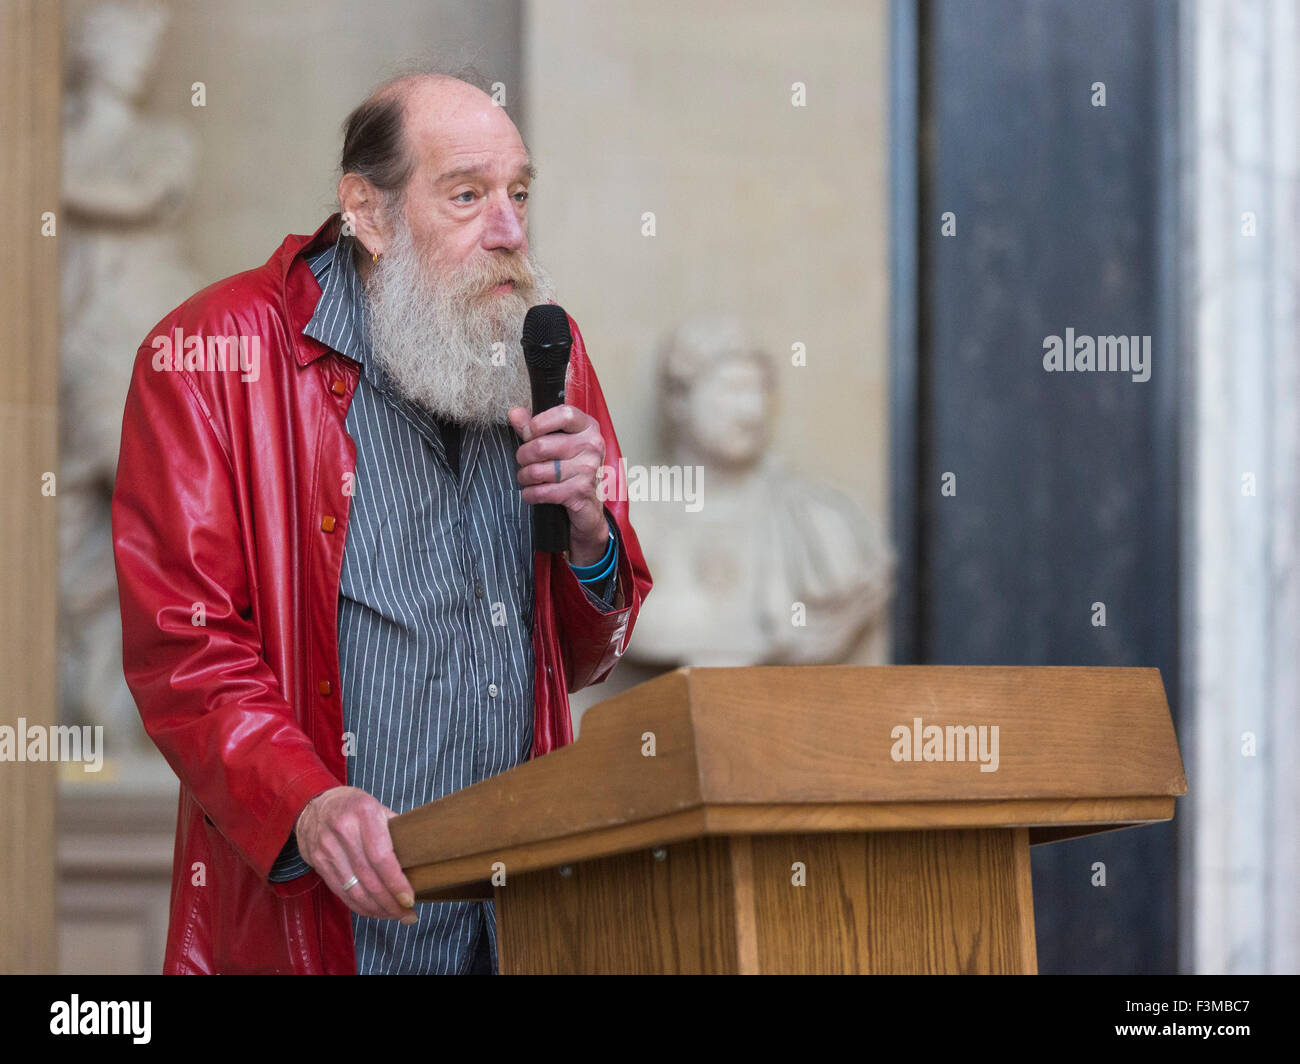 Woodstock, Oxfordshire, UK. 09/10/2015. Pictured: artist Lawrence Weiner. The exhibition 'Within a Realm of Distance', Lawrence Weiner at Blenheim Palace opens on 10 October and runs until 20 December 2015. Stock Photo